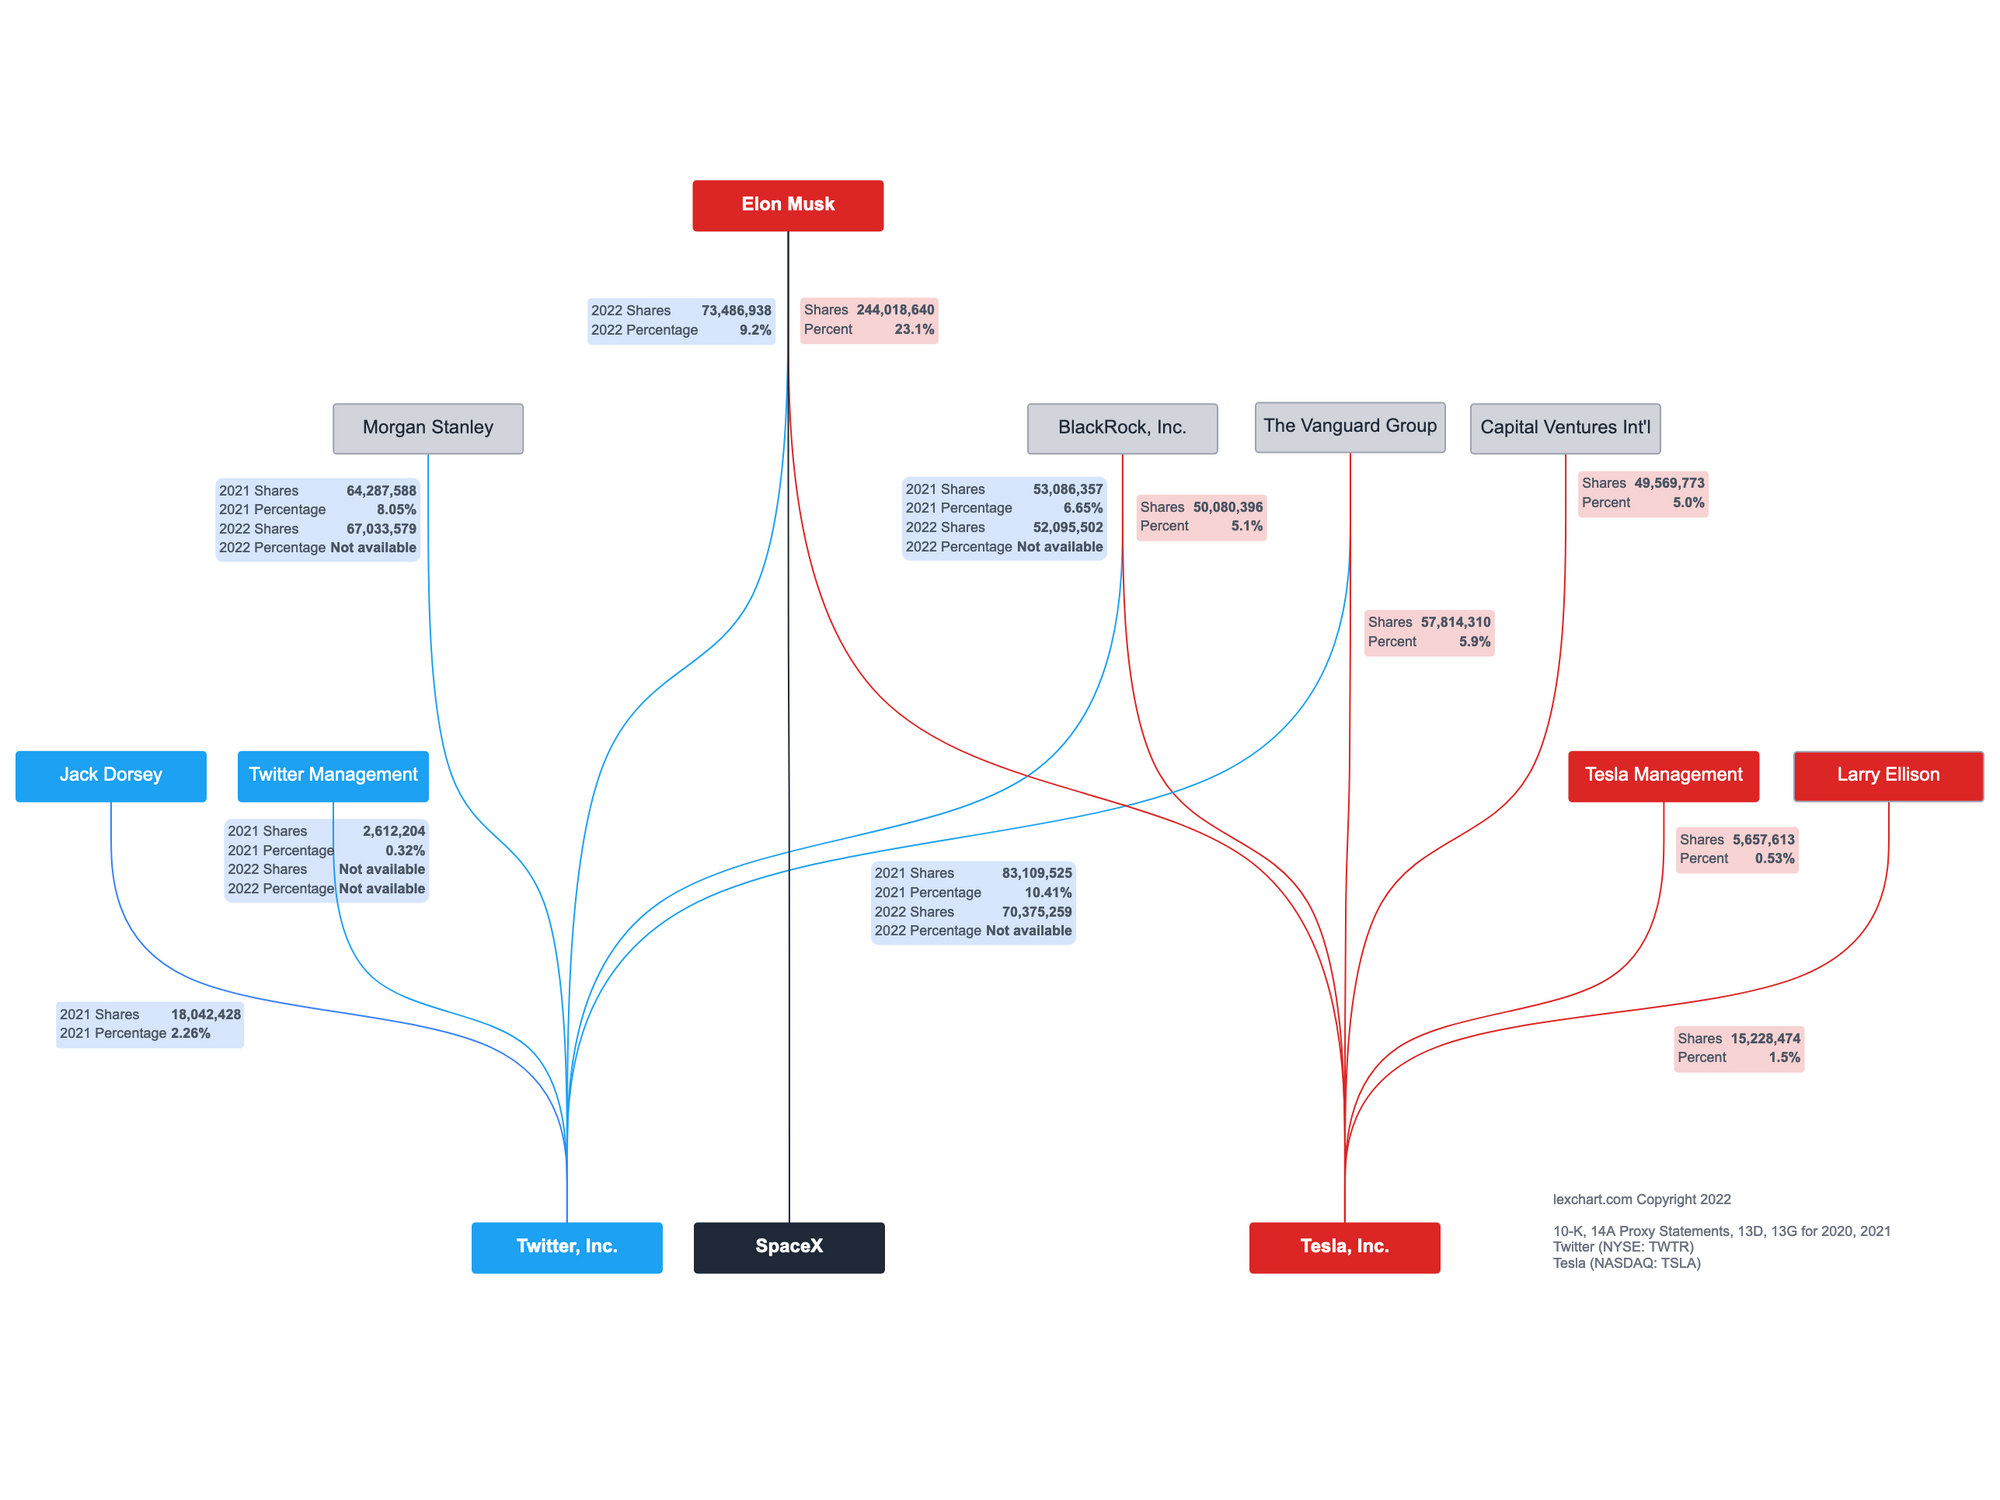 Elon Musk Tesla, Twitter, SpaceX Ownership Structure